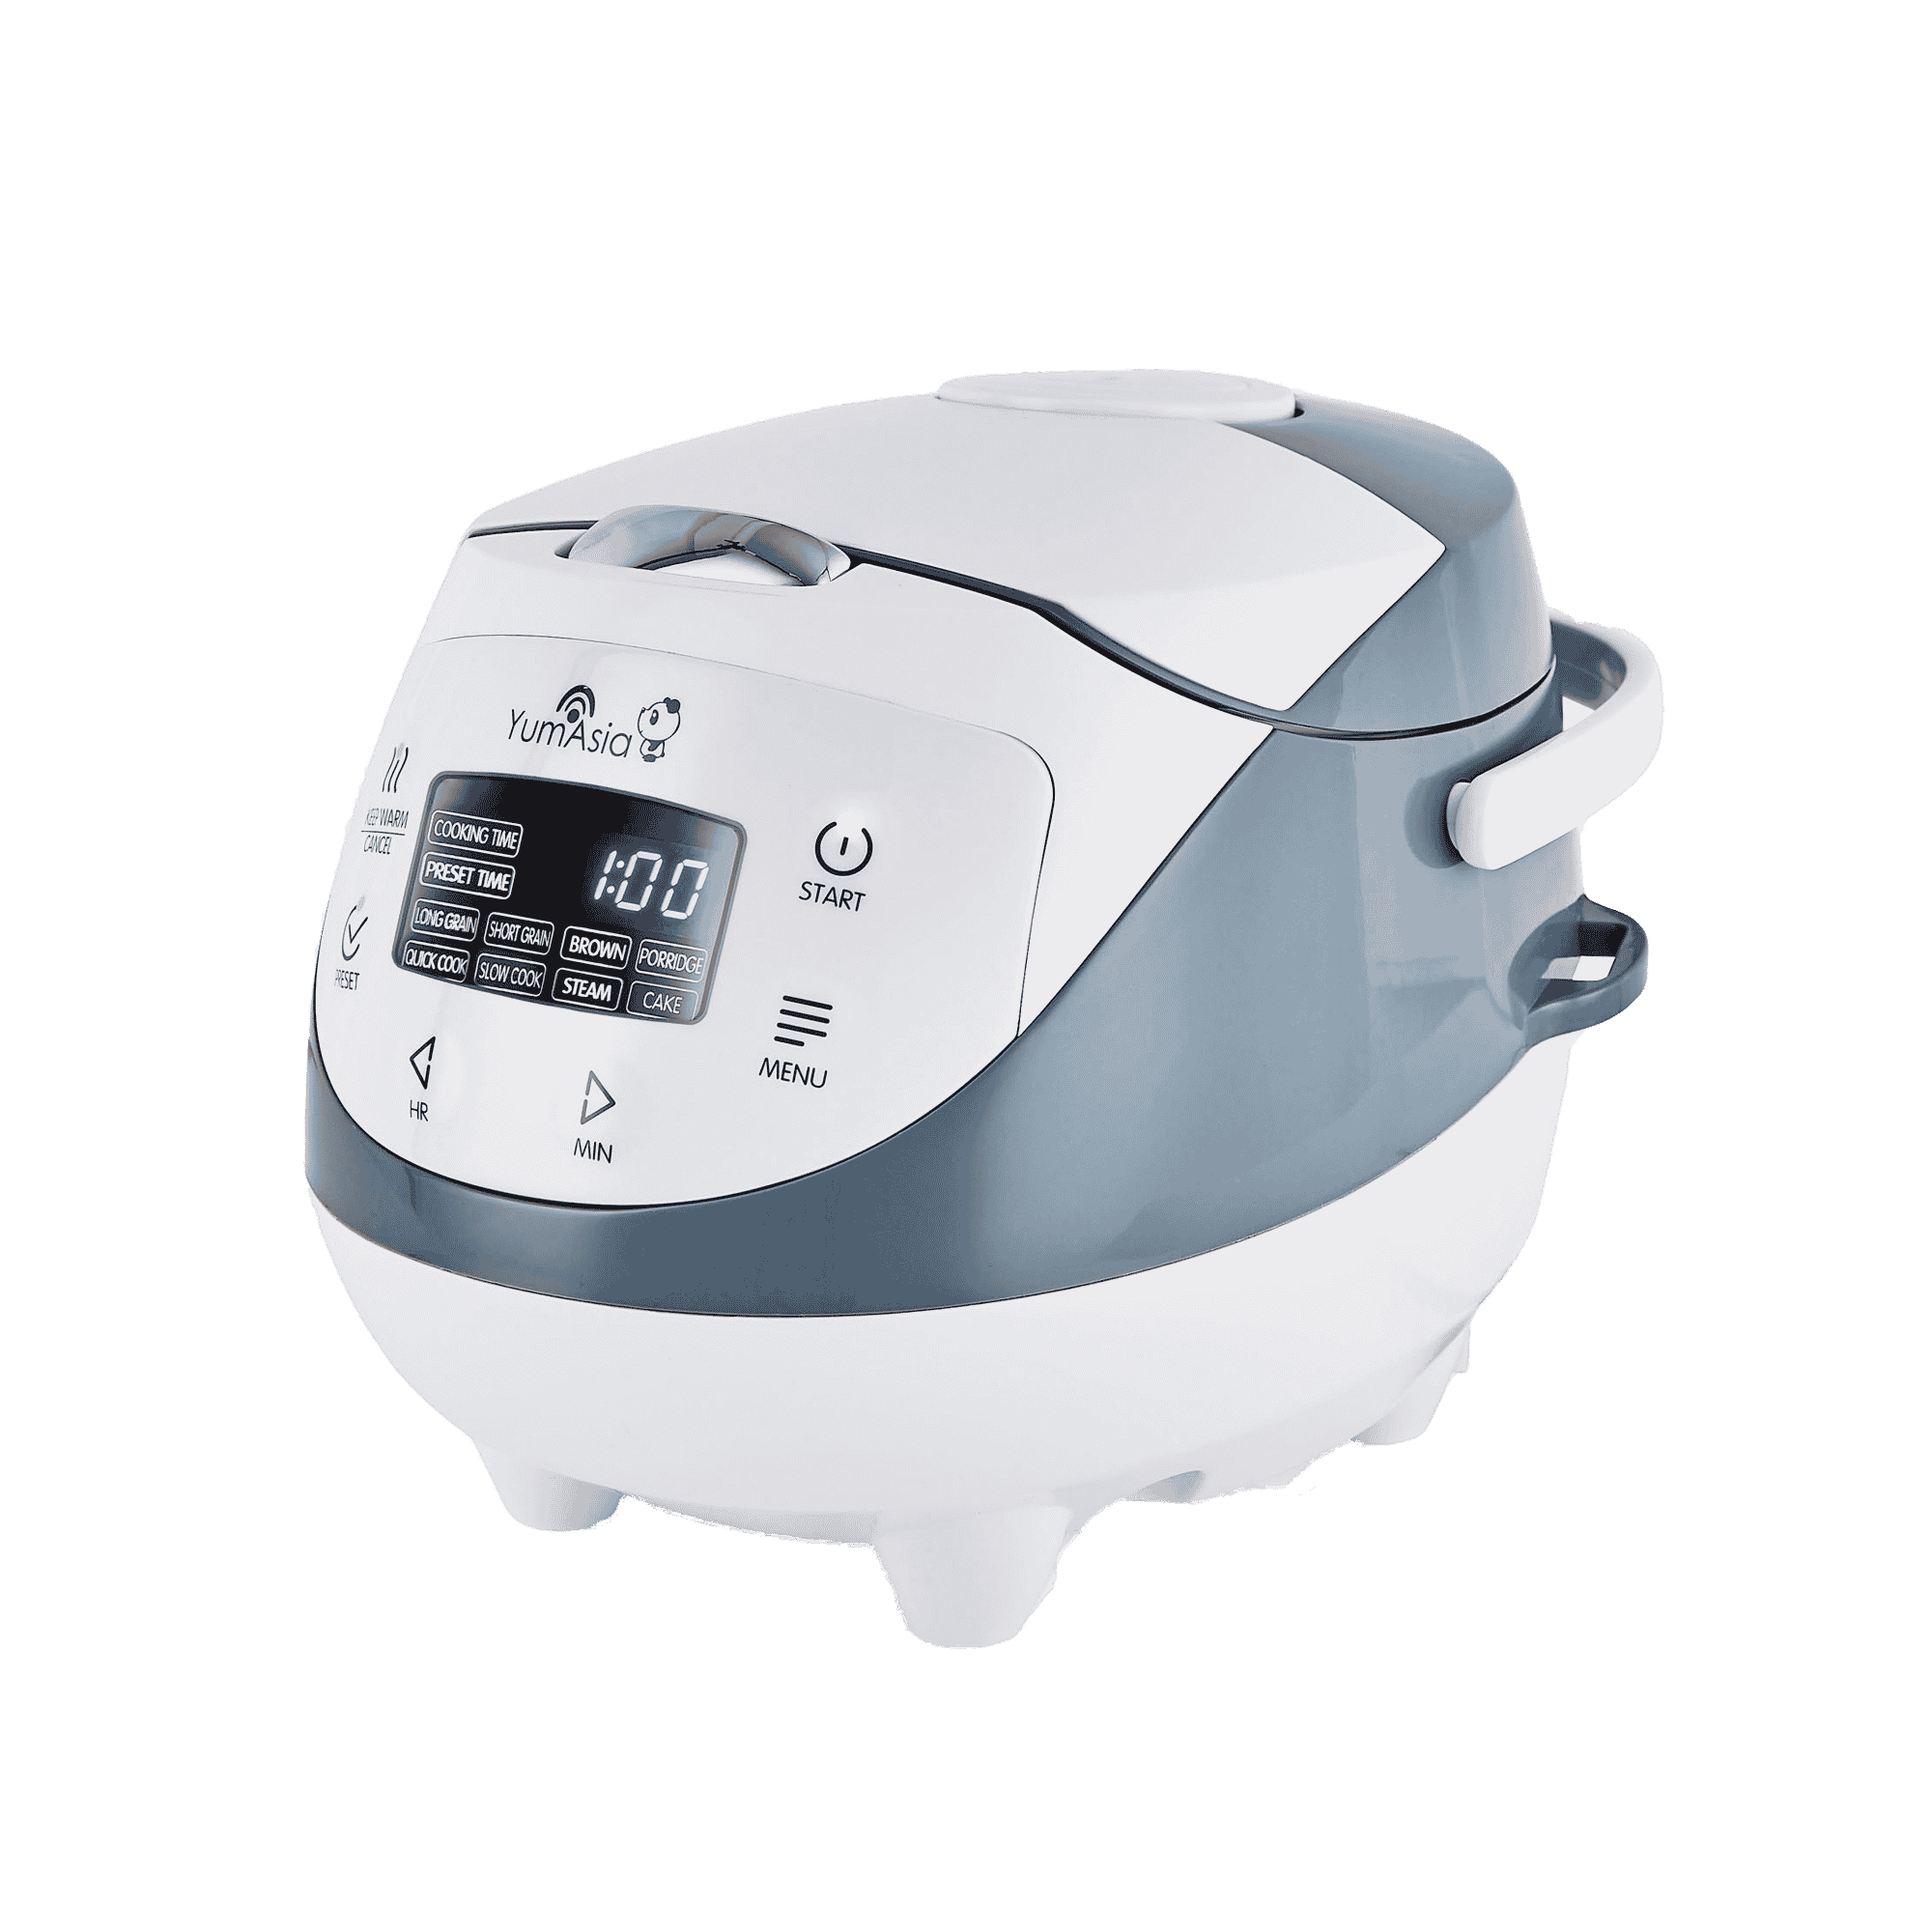 APARTMENTS Mini Rice Cooker 3.5 Cups Uncooked And 26.5 Pound Rice